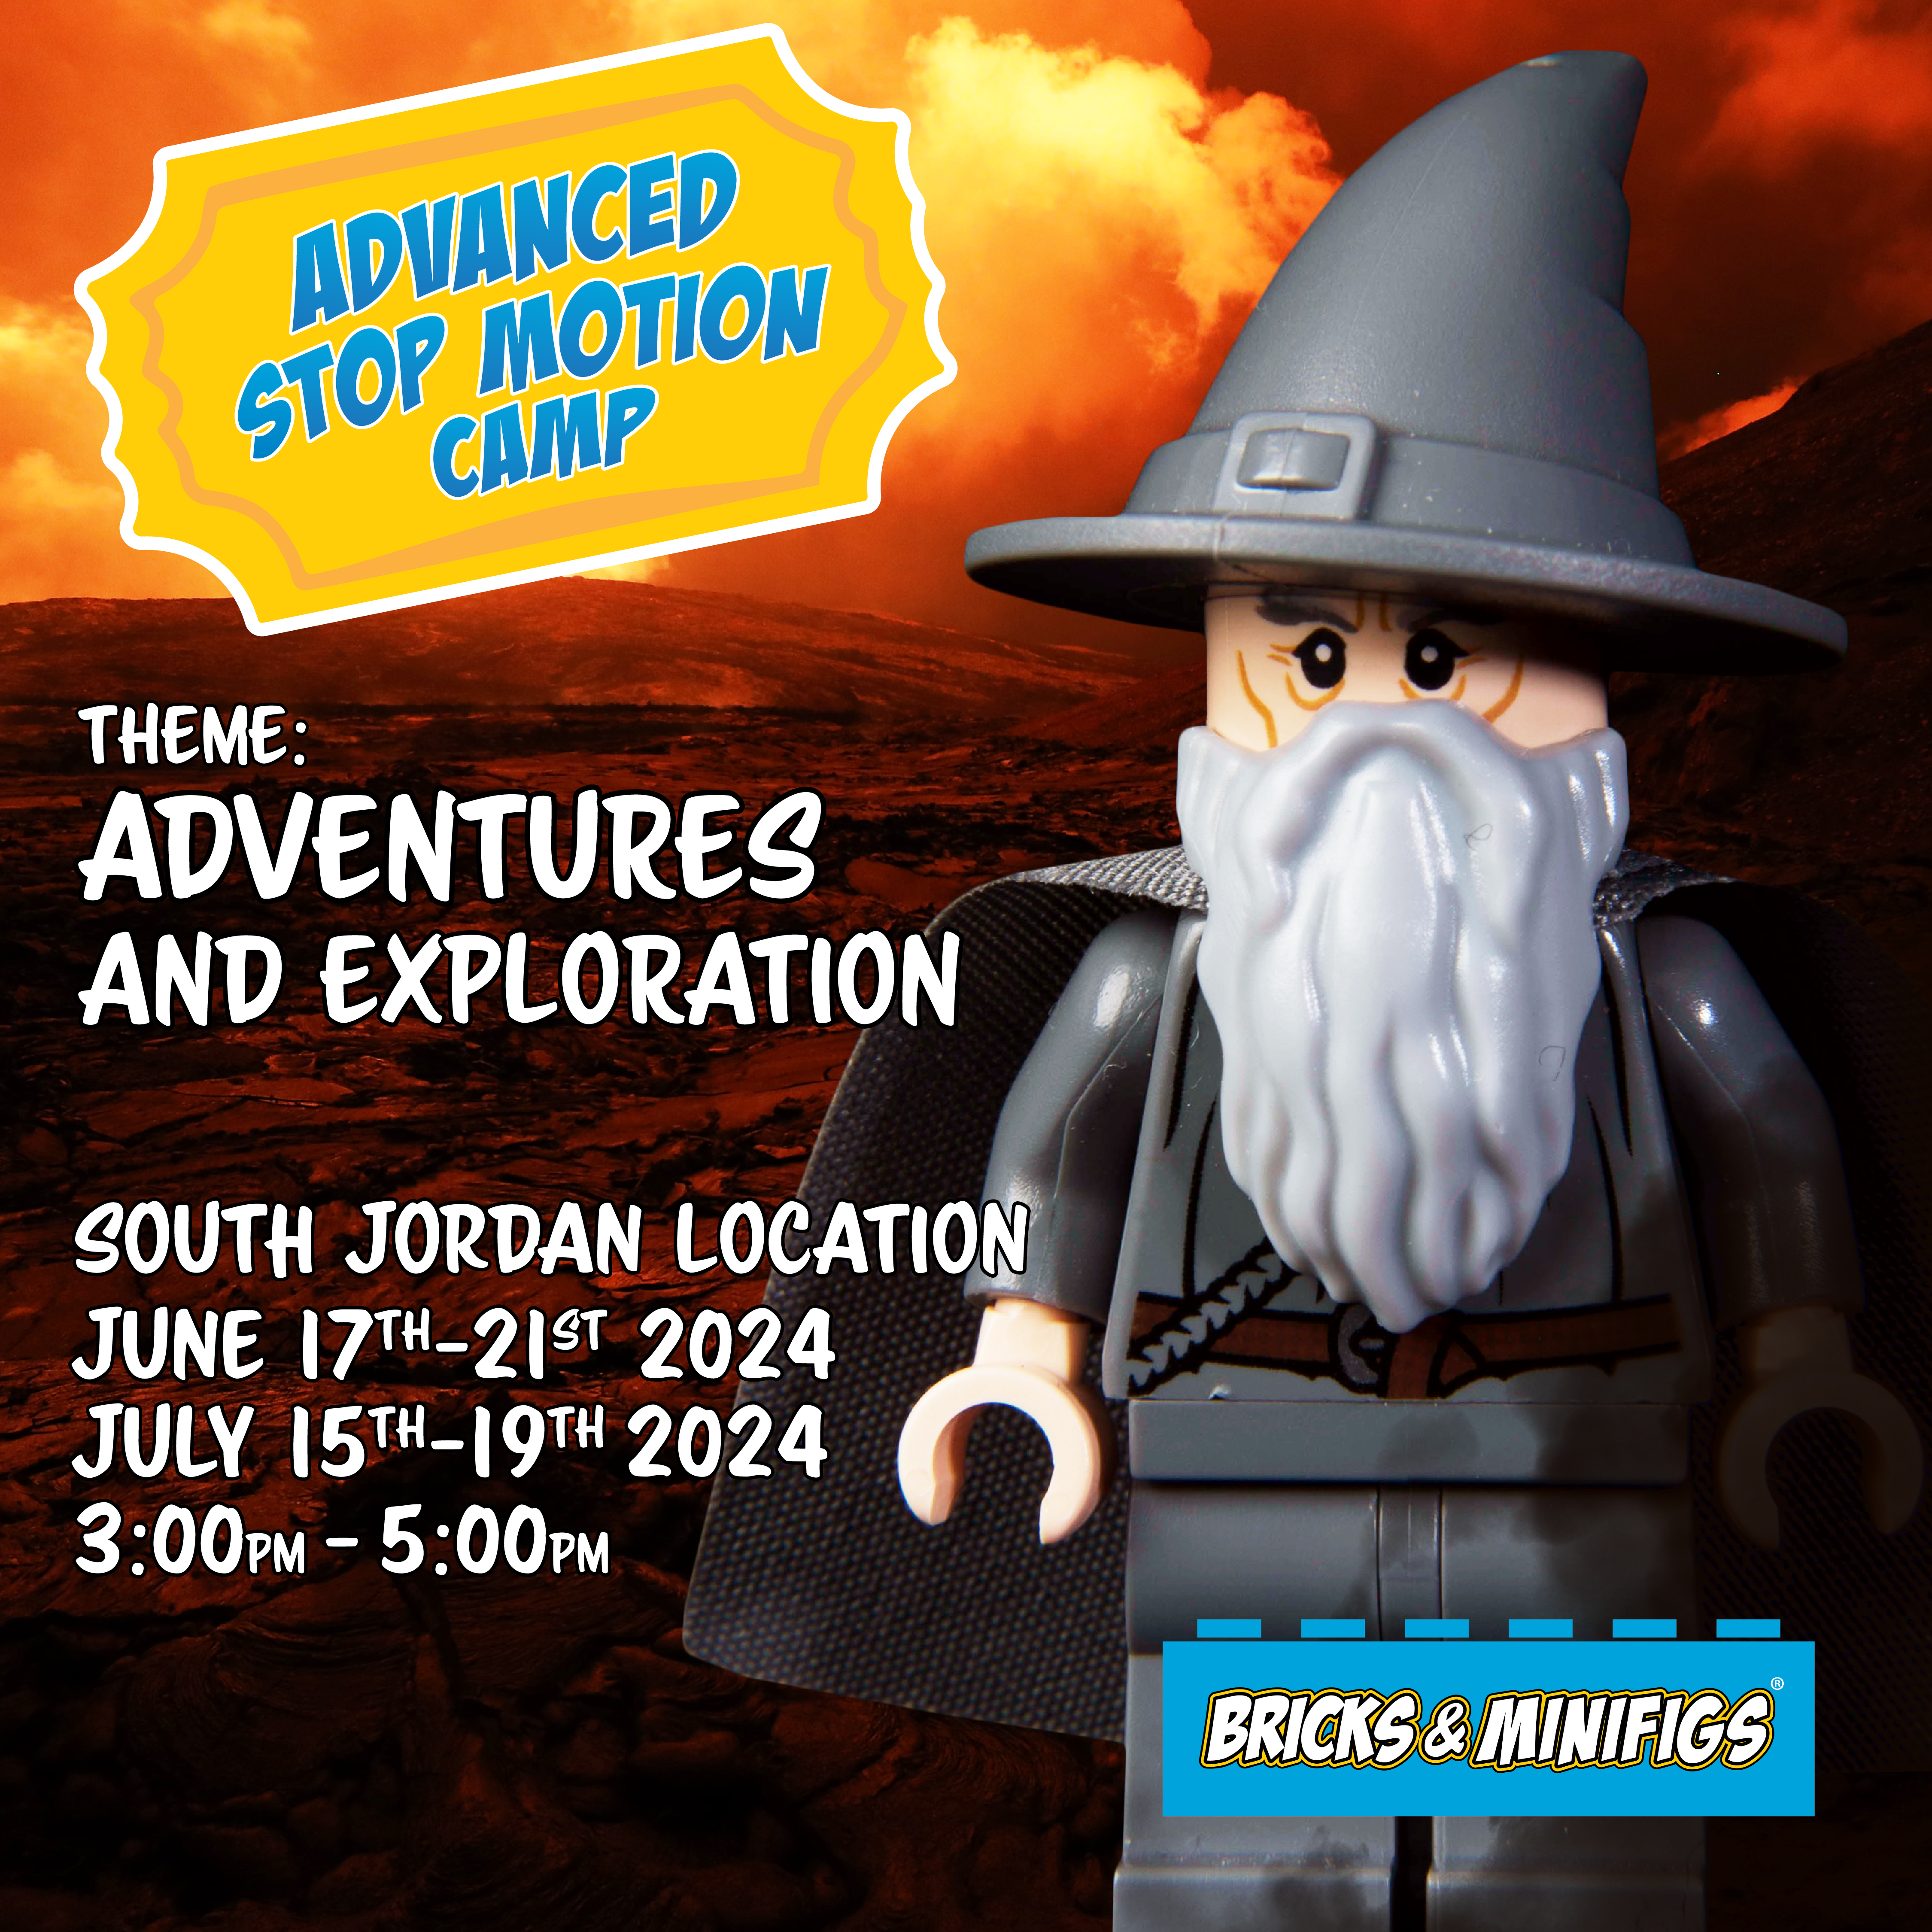 Advanced Stop Motion Camp: Summer 2024 - Adventures and Exploration (July 15-19 2024, 3:00 - 5:00 pm, South Jordan)